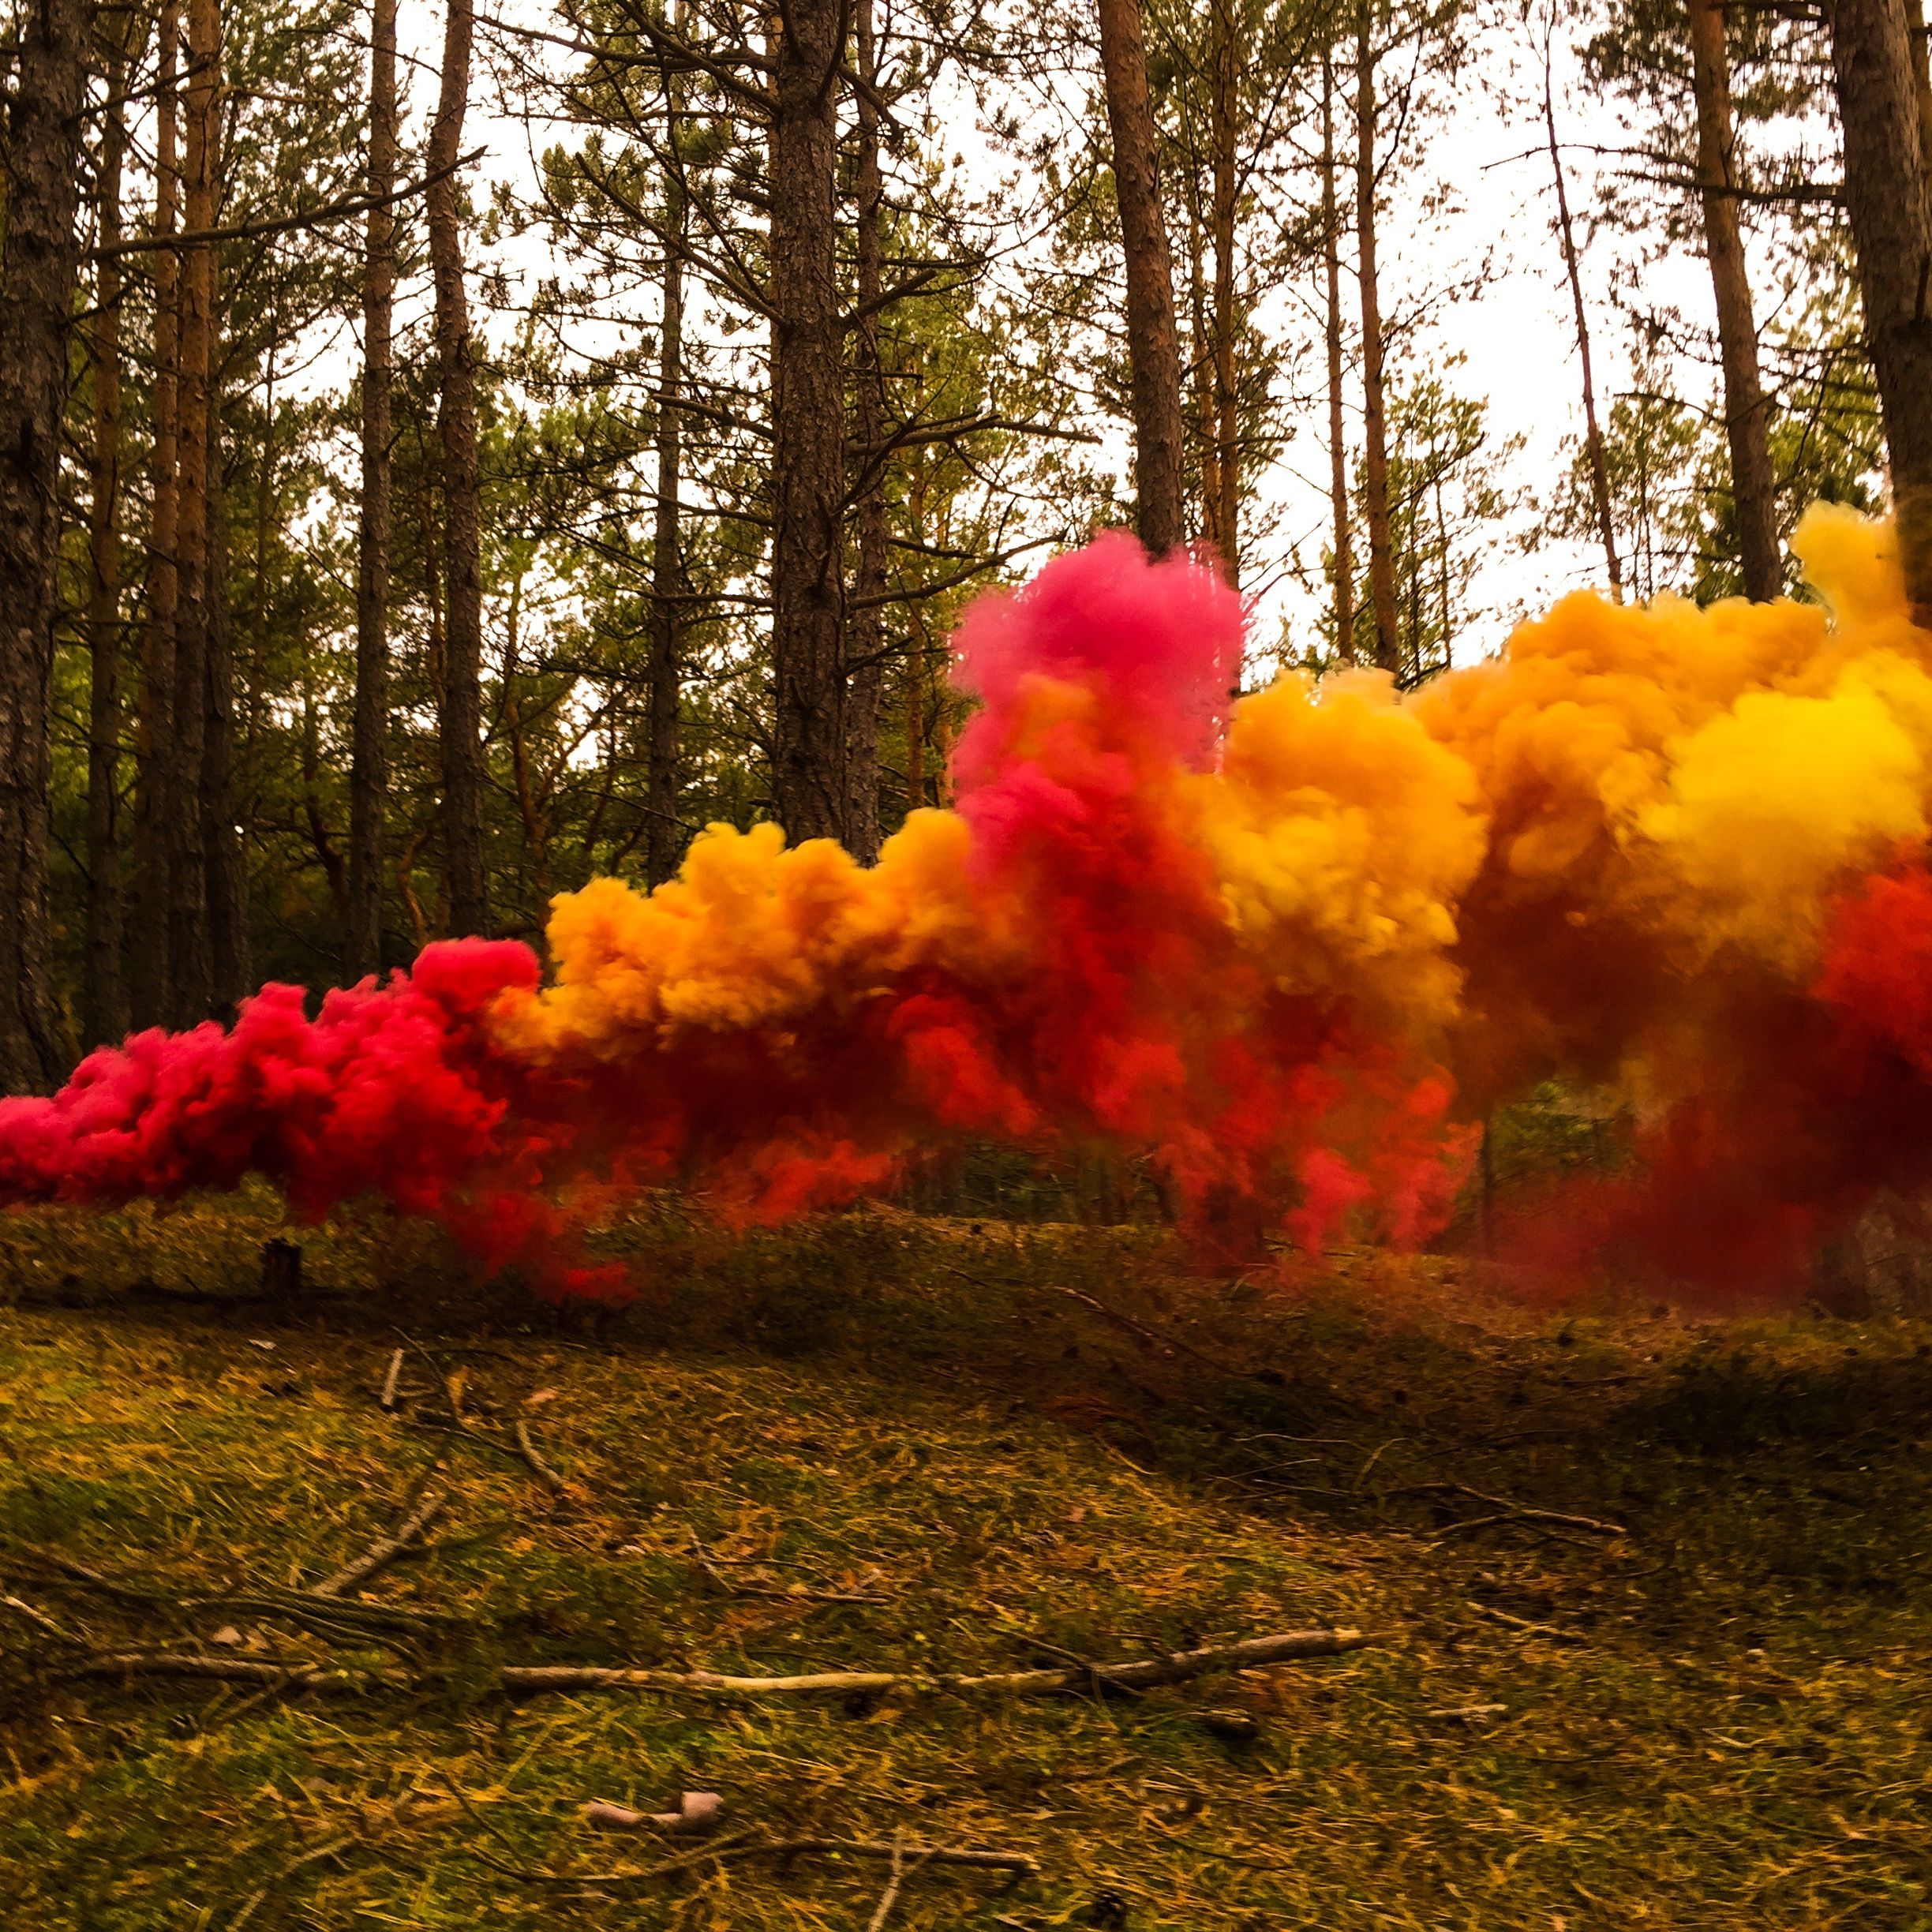 How to Make the Ultimate Colored Smoke Bomb